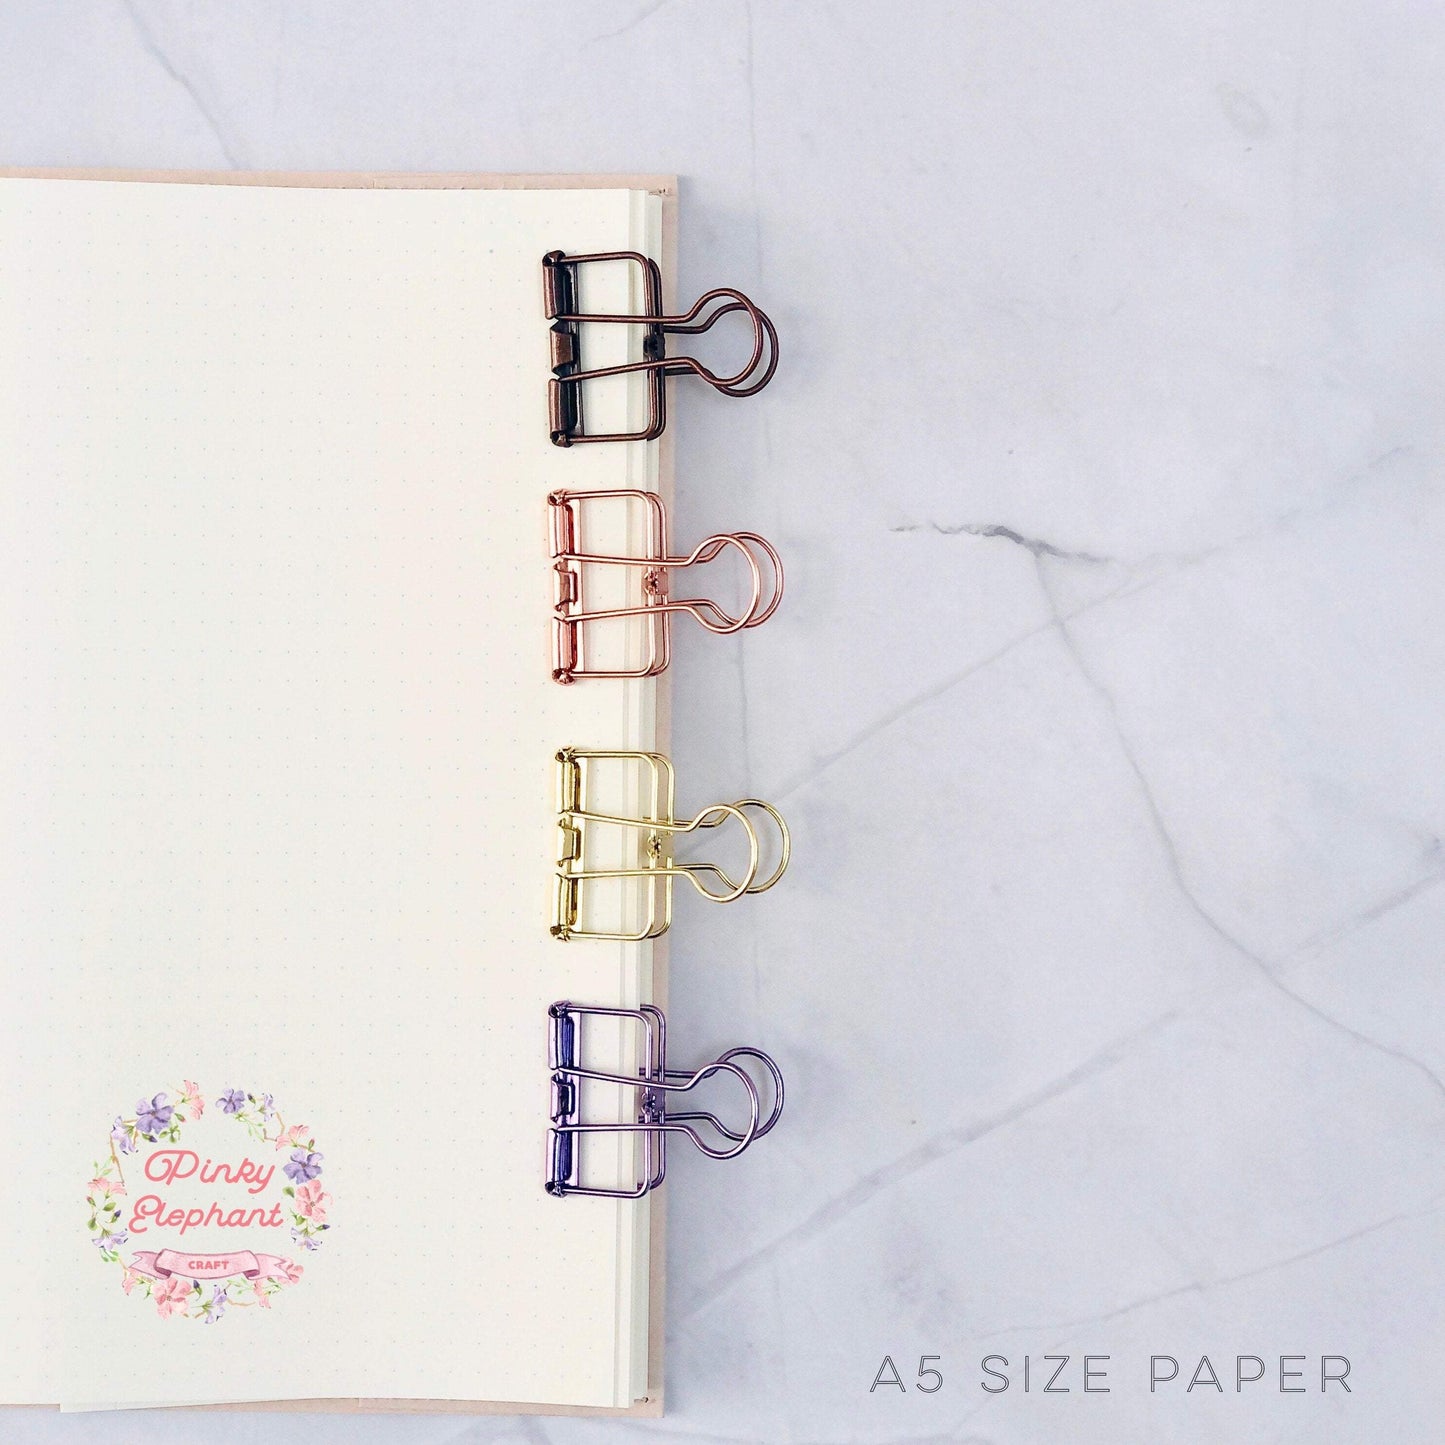 Four skeleton clips are clamped on the open A5 dotted notebook. Their colors from top to bottom are matte brown, rose gold, gold and metallic purple. 